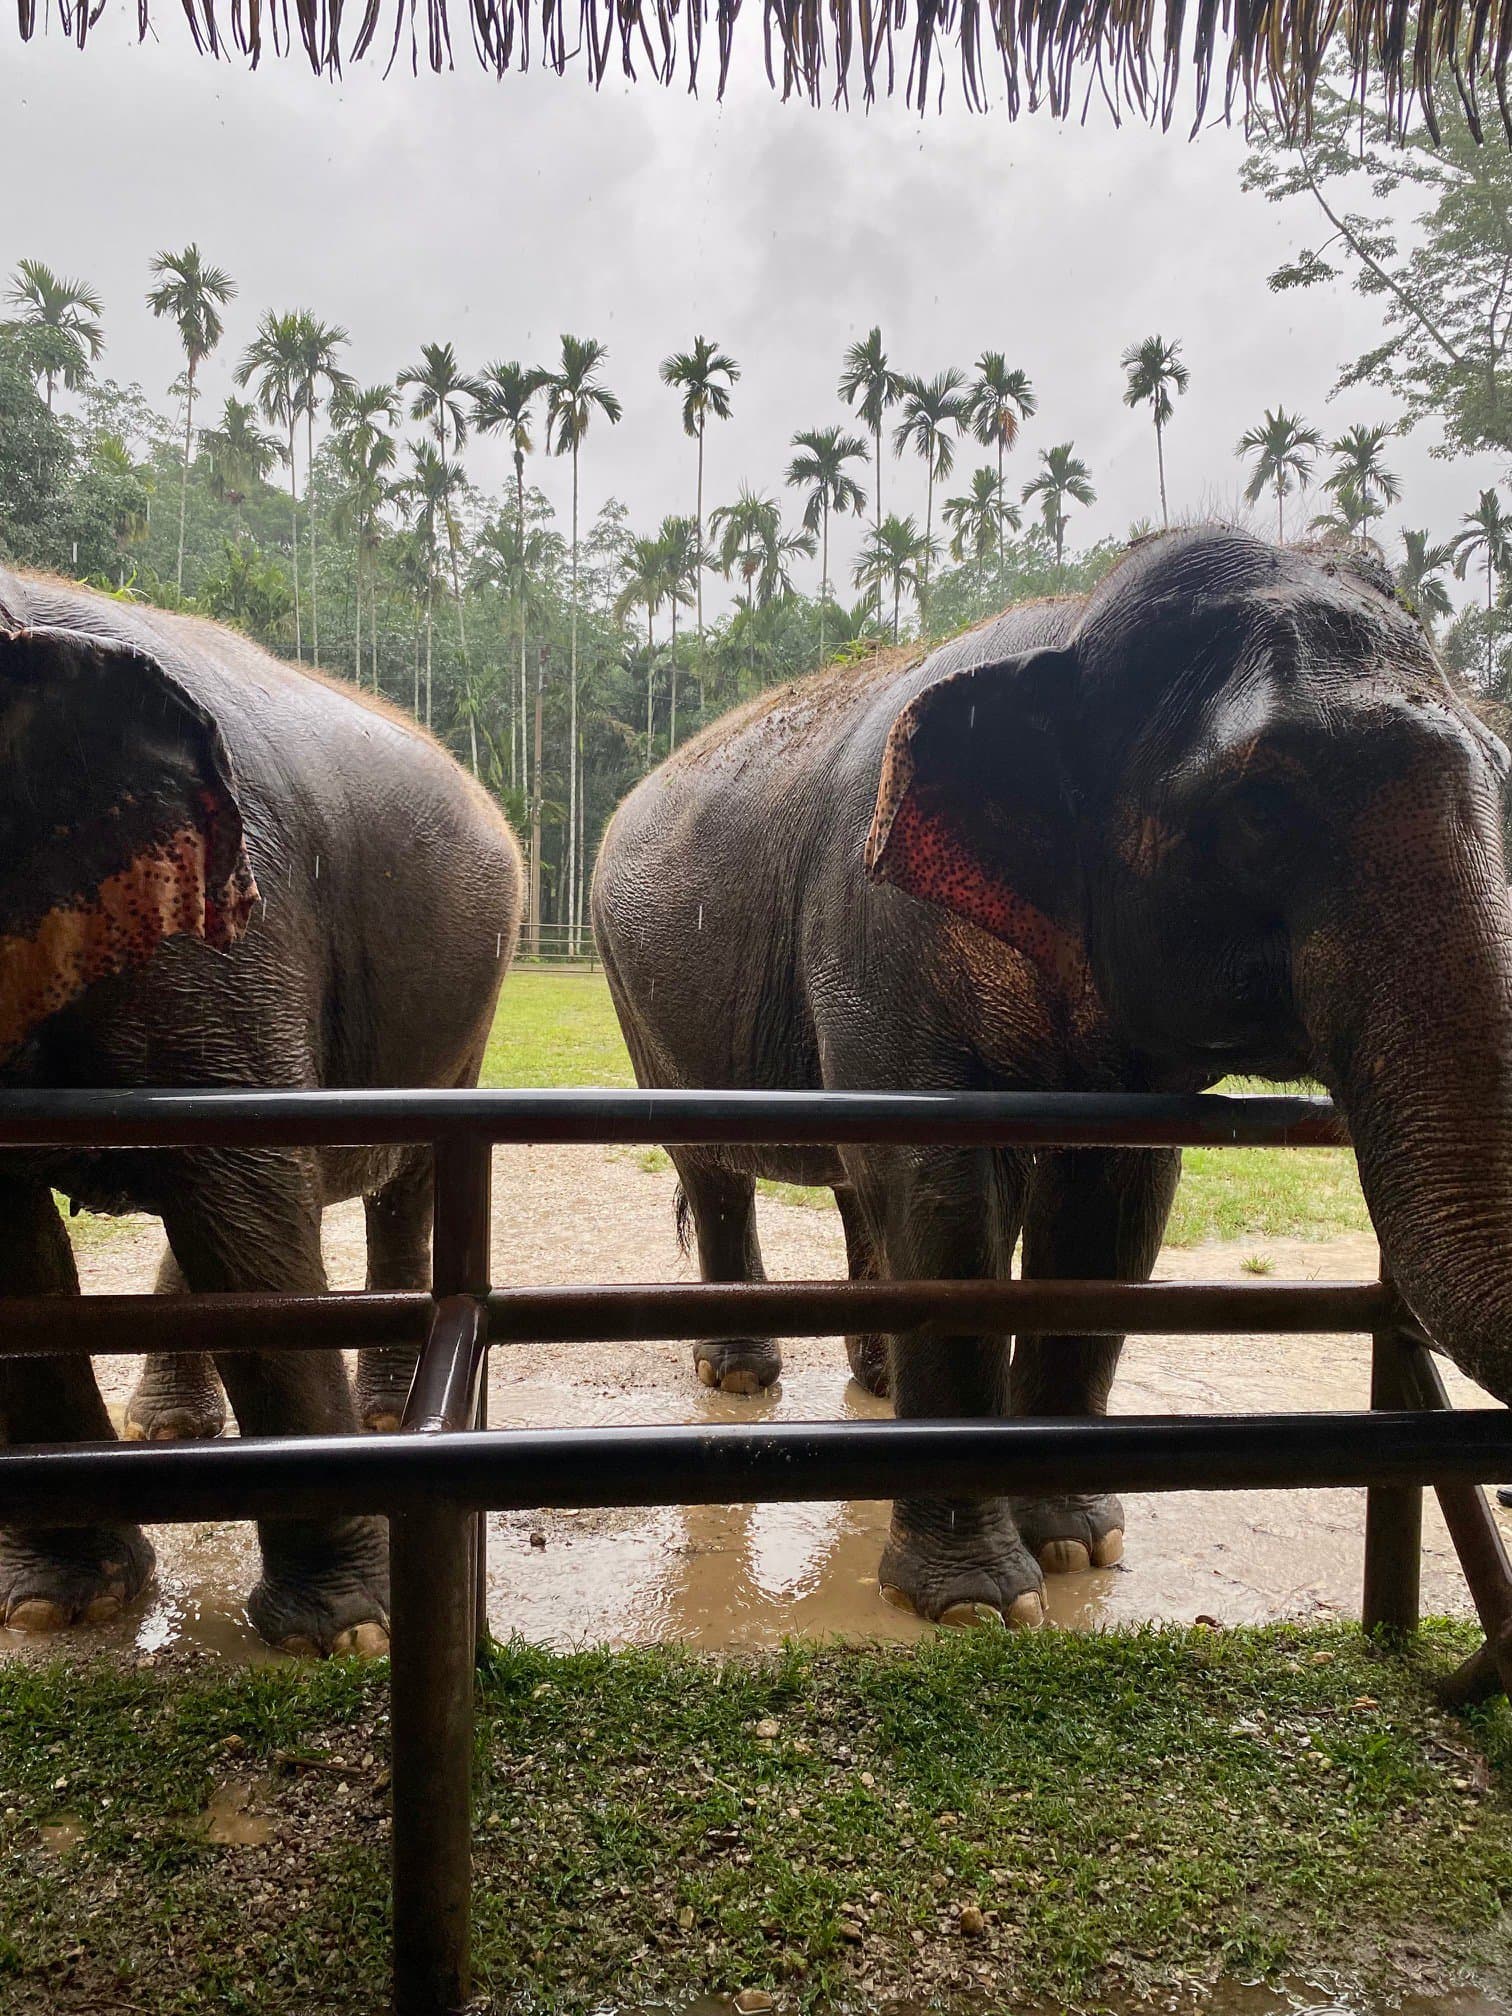 Guide to Elephants in Thailand | Ethical Advice - ETG Blog